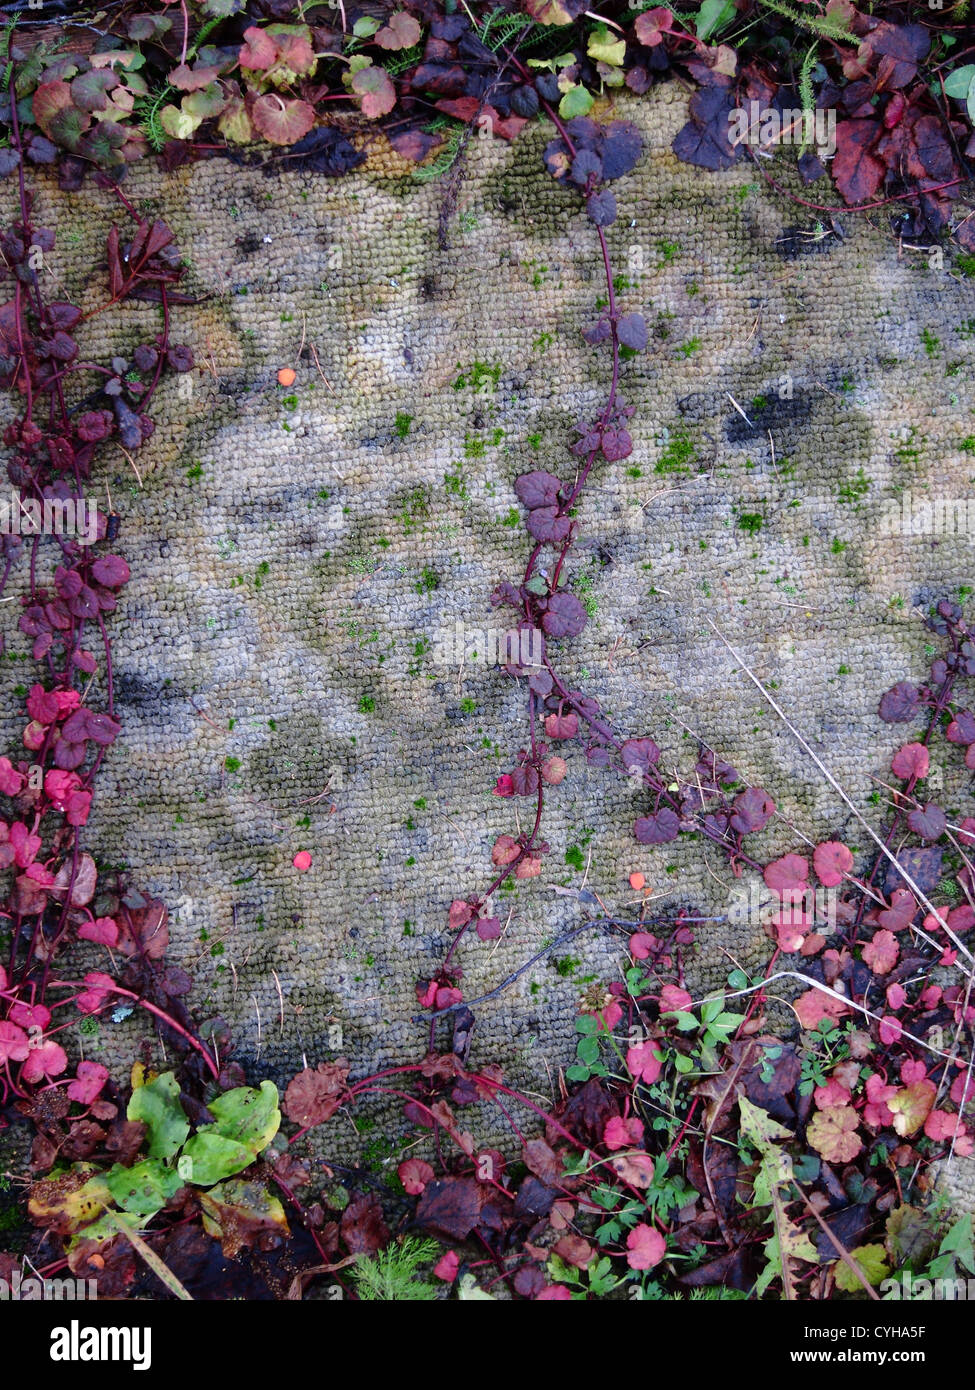 old carpet close-up with autumn plants Stock Photo